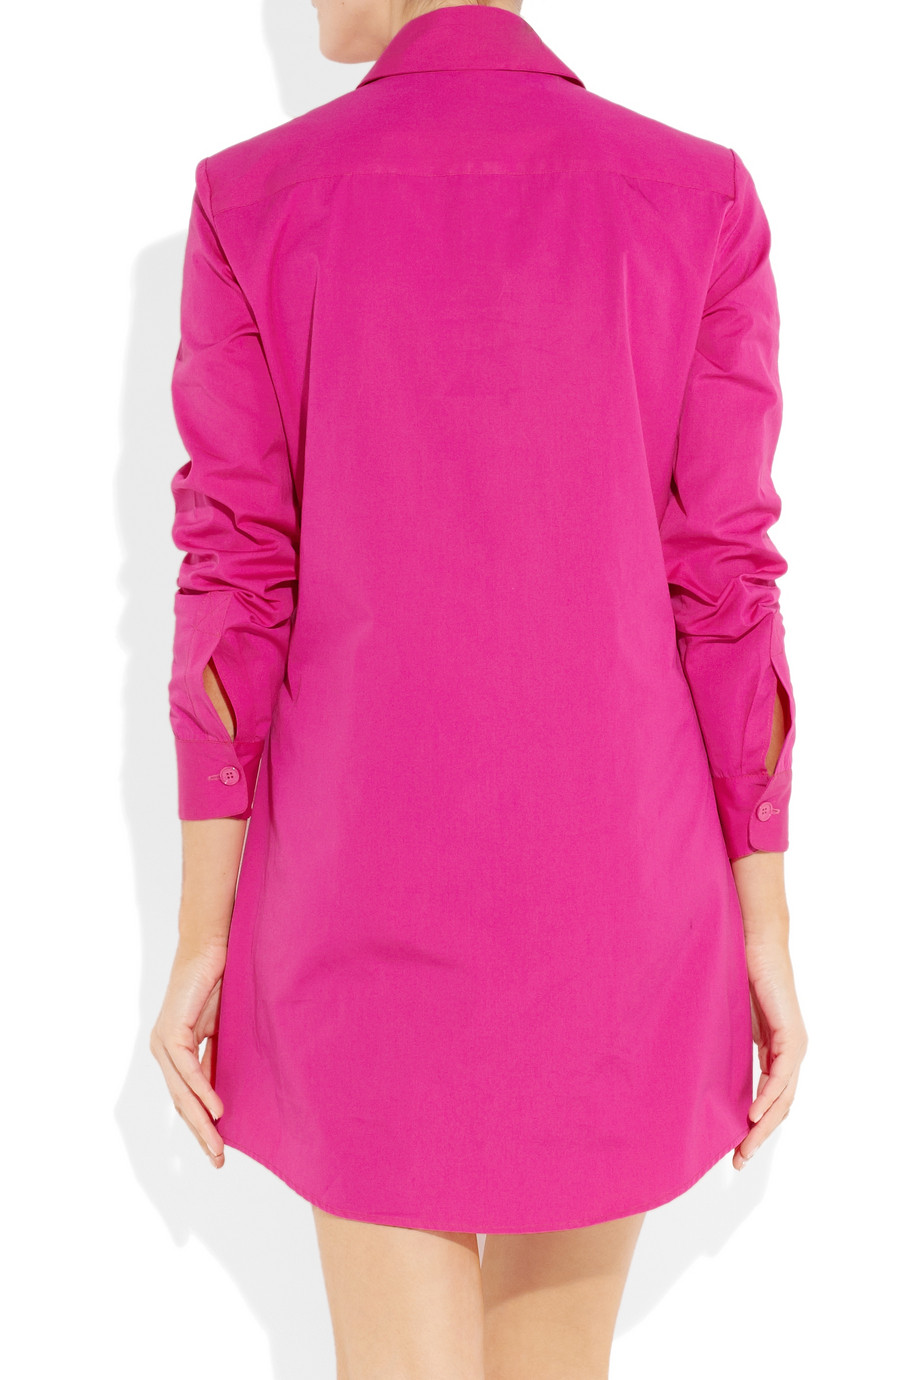 Michael kors Cotton Tunic Dress in Pink | Lyst